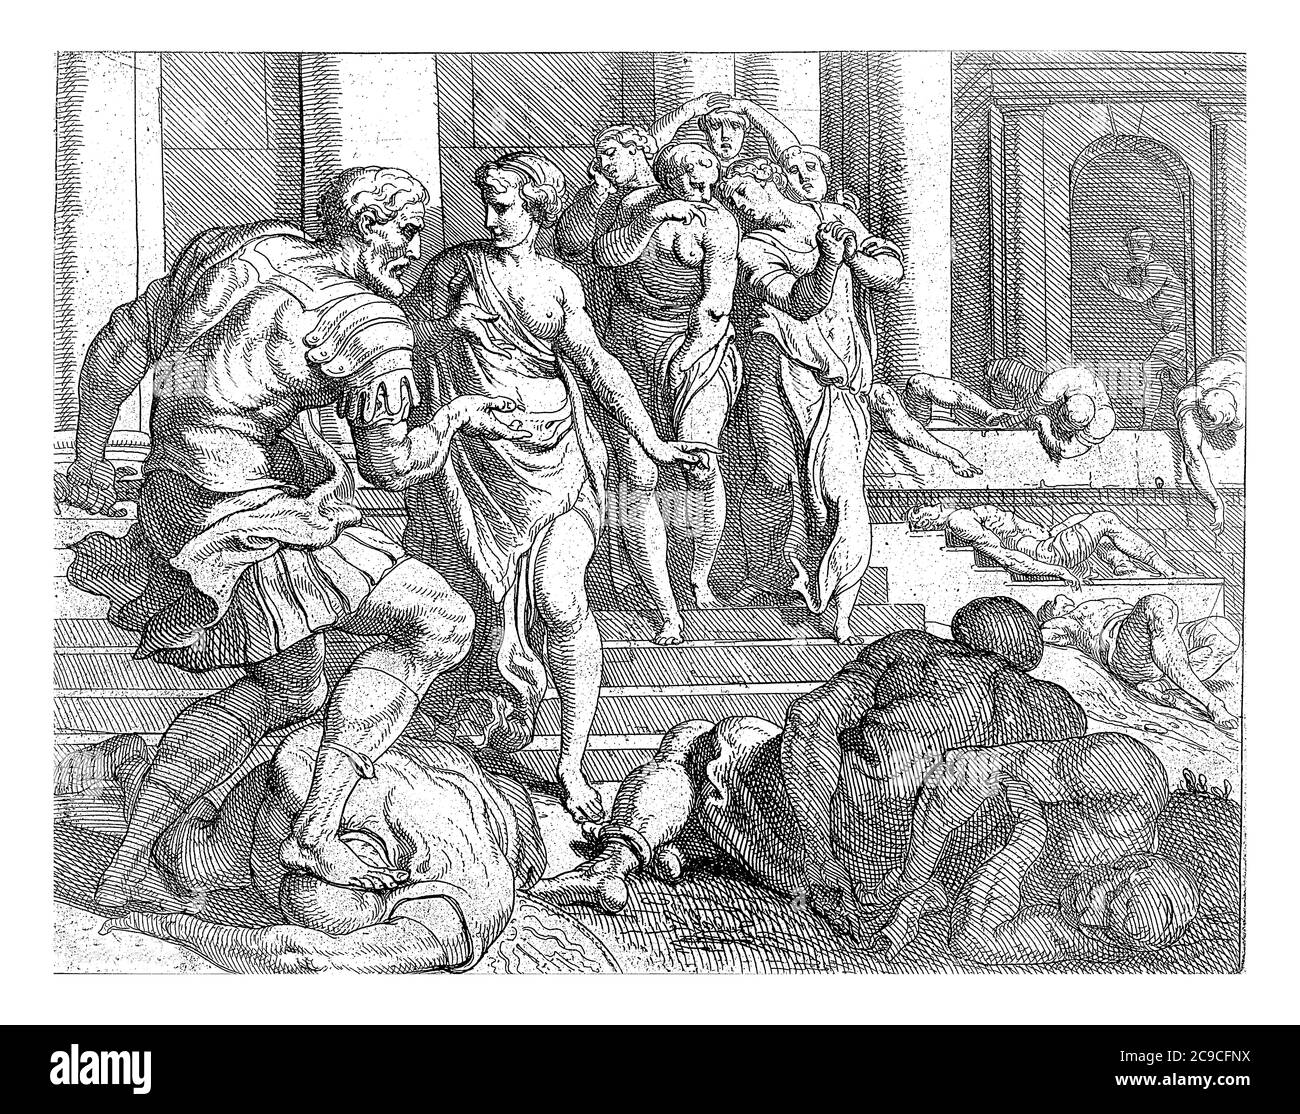 Punishment of the servants of Penelope, Odysseus, who killed the suitors of Penelope, orders his nurse Eurykleia to bring together all the unfaithful Stock Photo